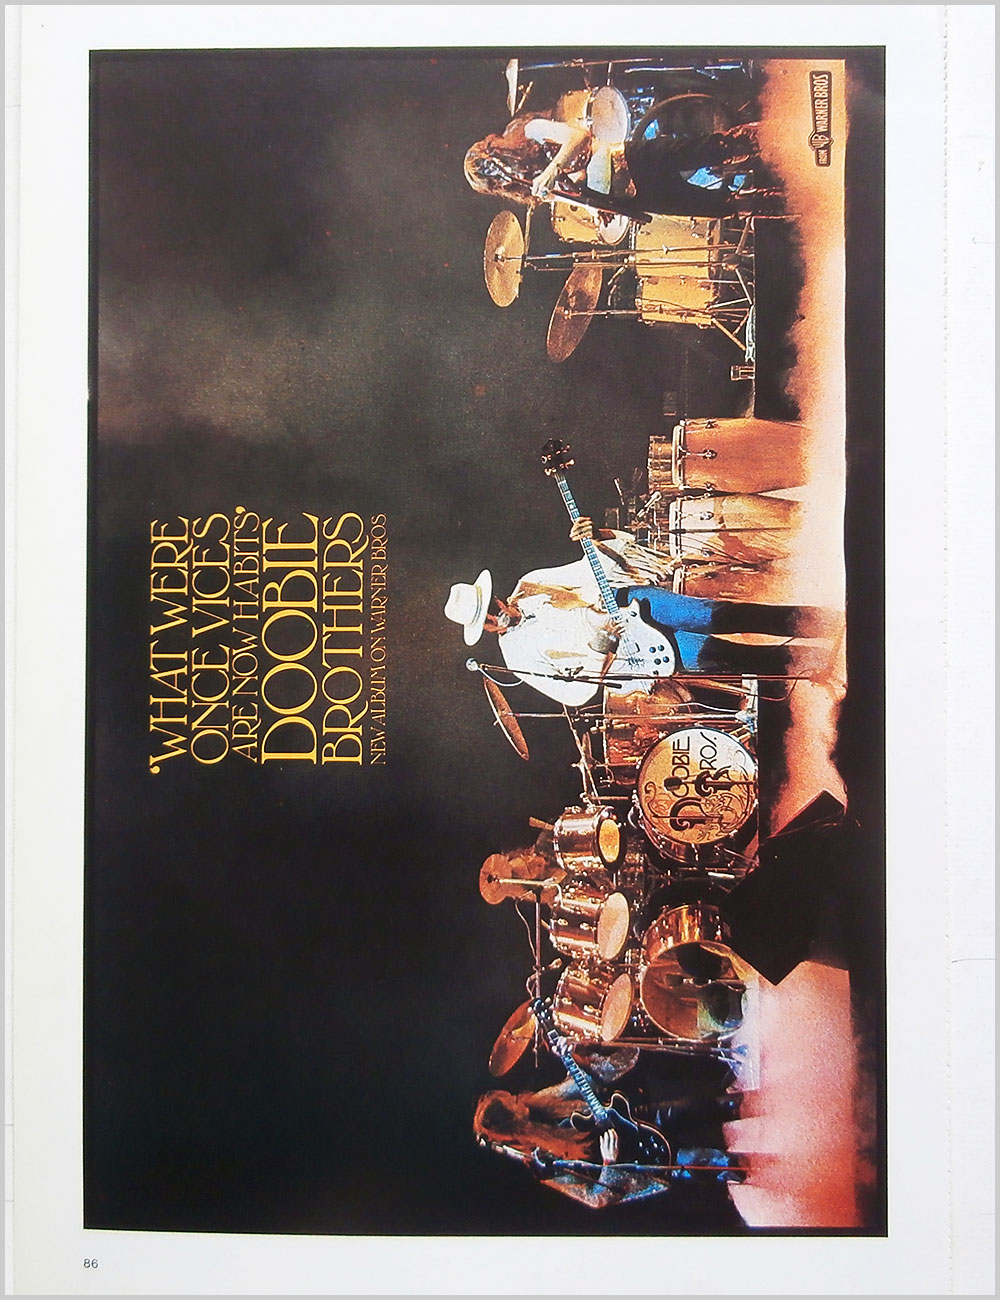 Doobie Brothers and The Tokyo Kid Brothers - Rock Poster: Doobie Brothers: What Were Once Vices Are Now Habits b/w The Tokyo Kid Brothers: The City  (PB100320) 